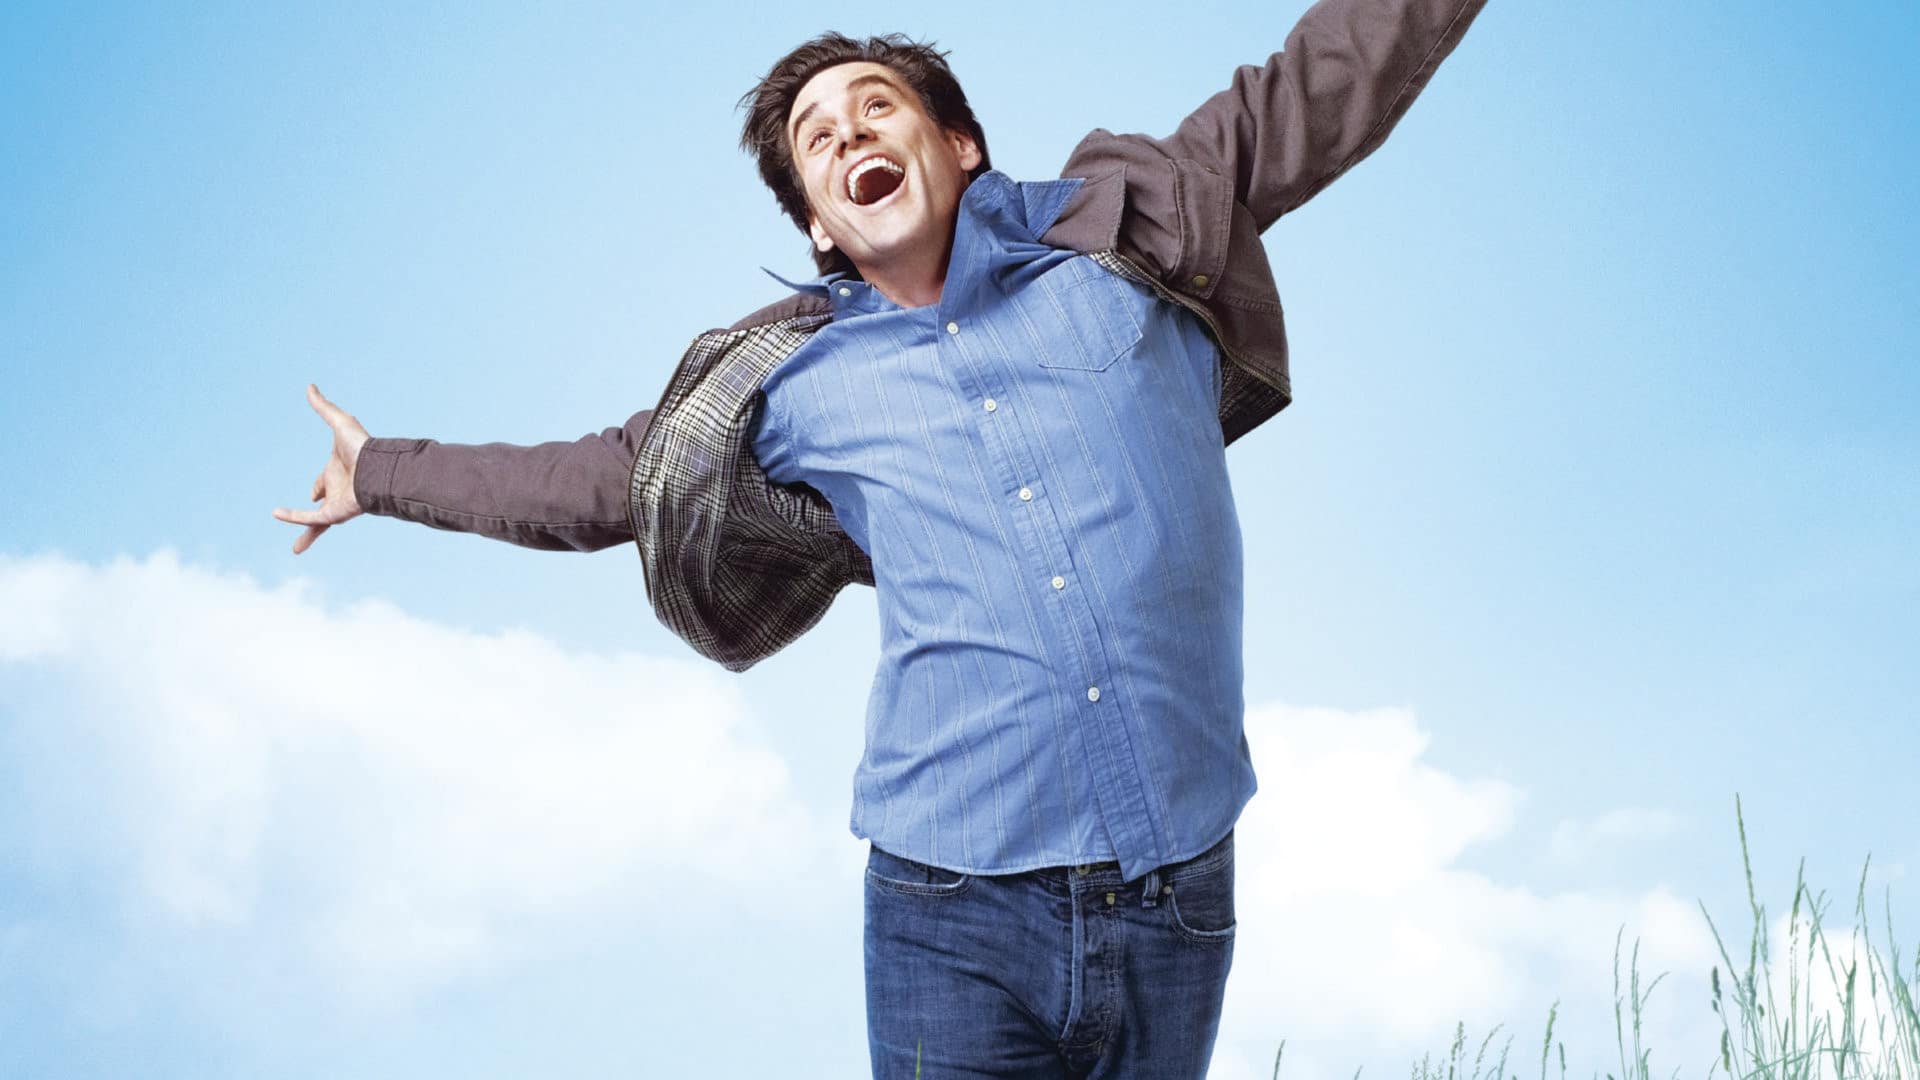 A man enthusiastically jumps in the air, arms outstretched, indicating his excitement.